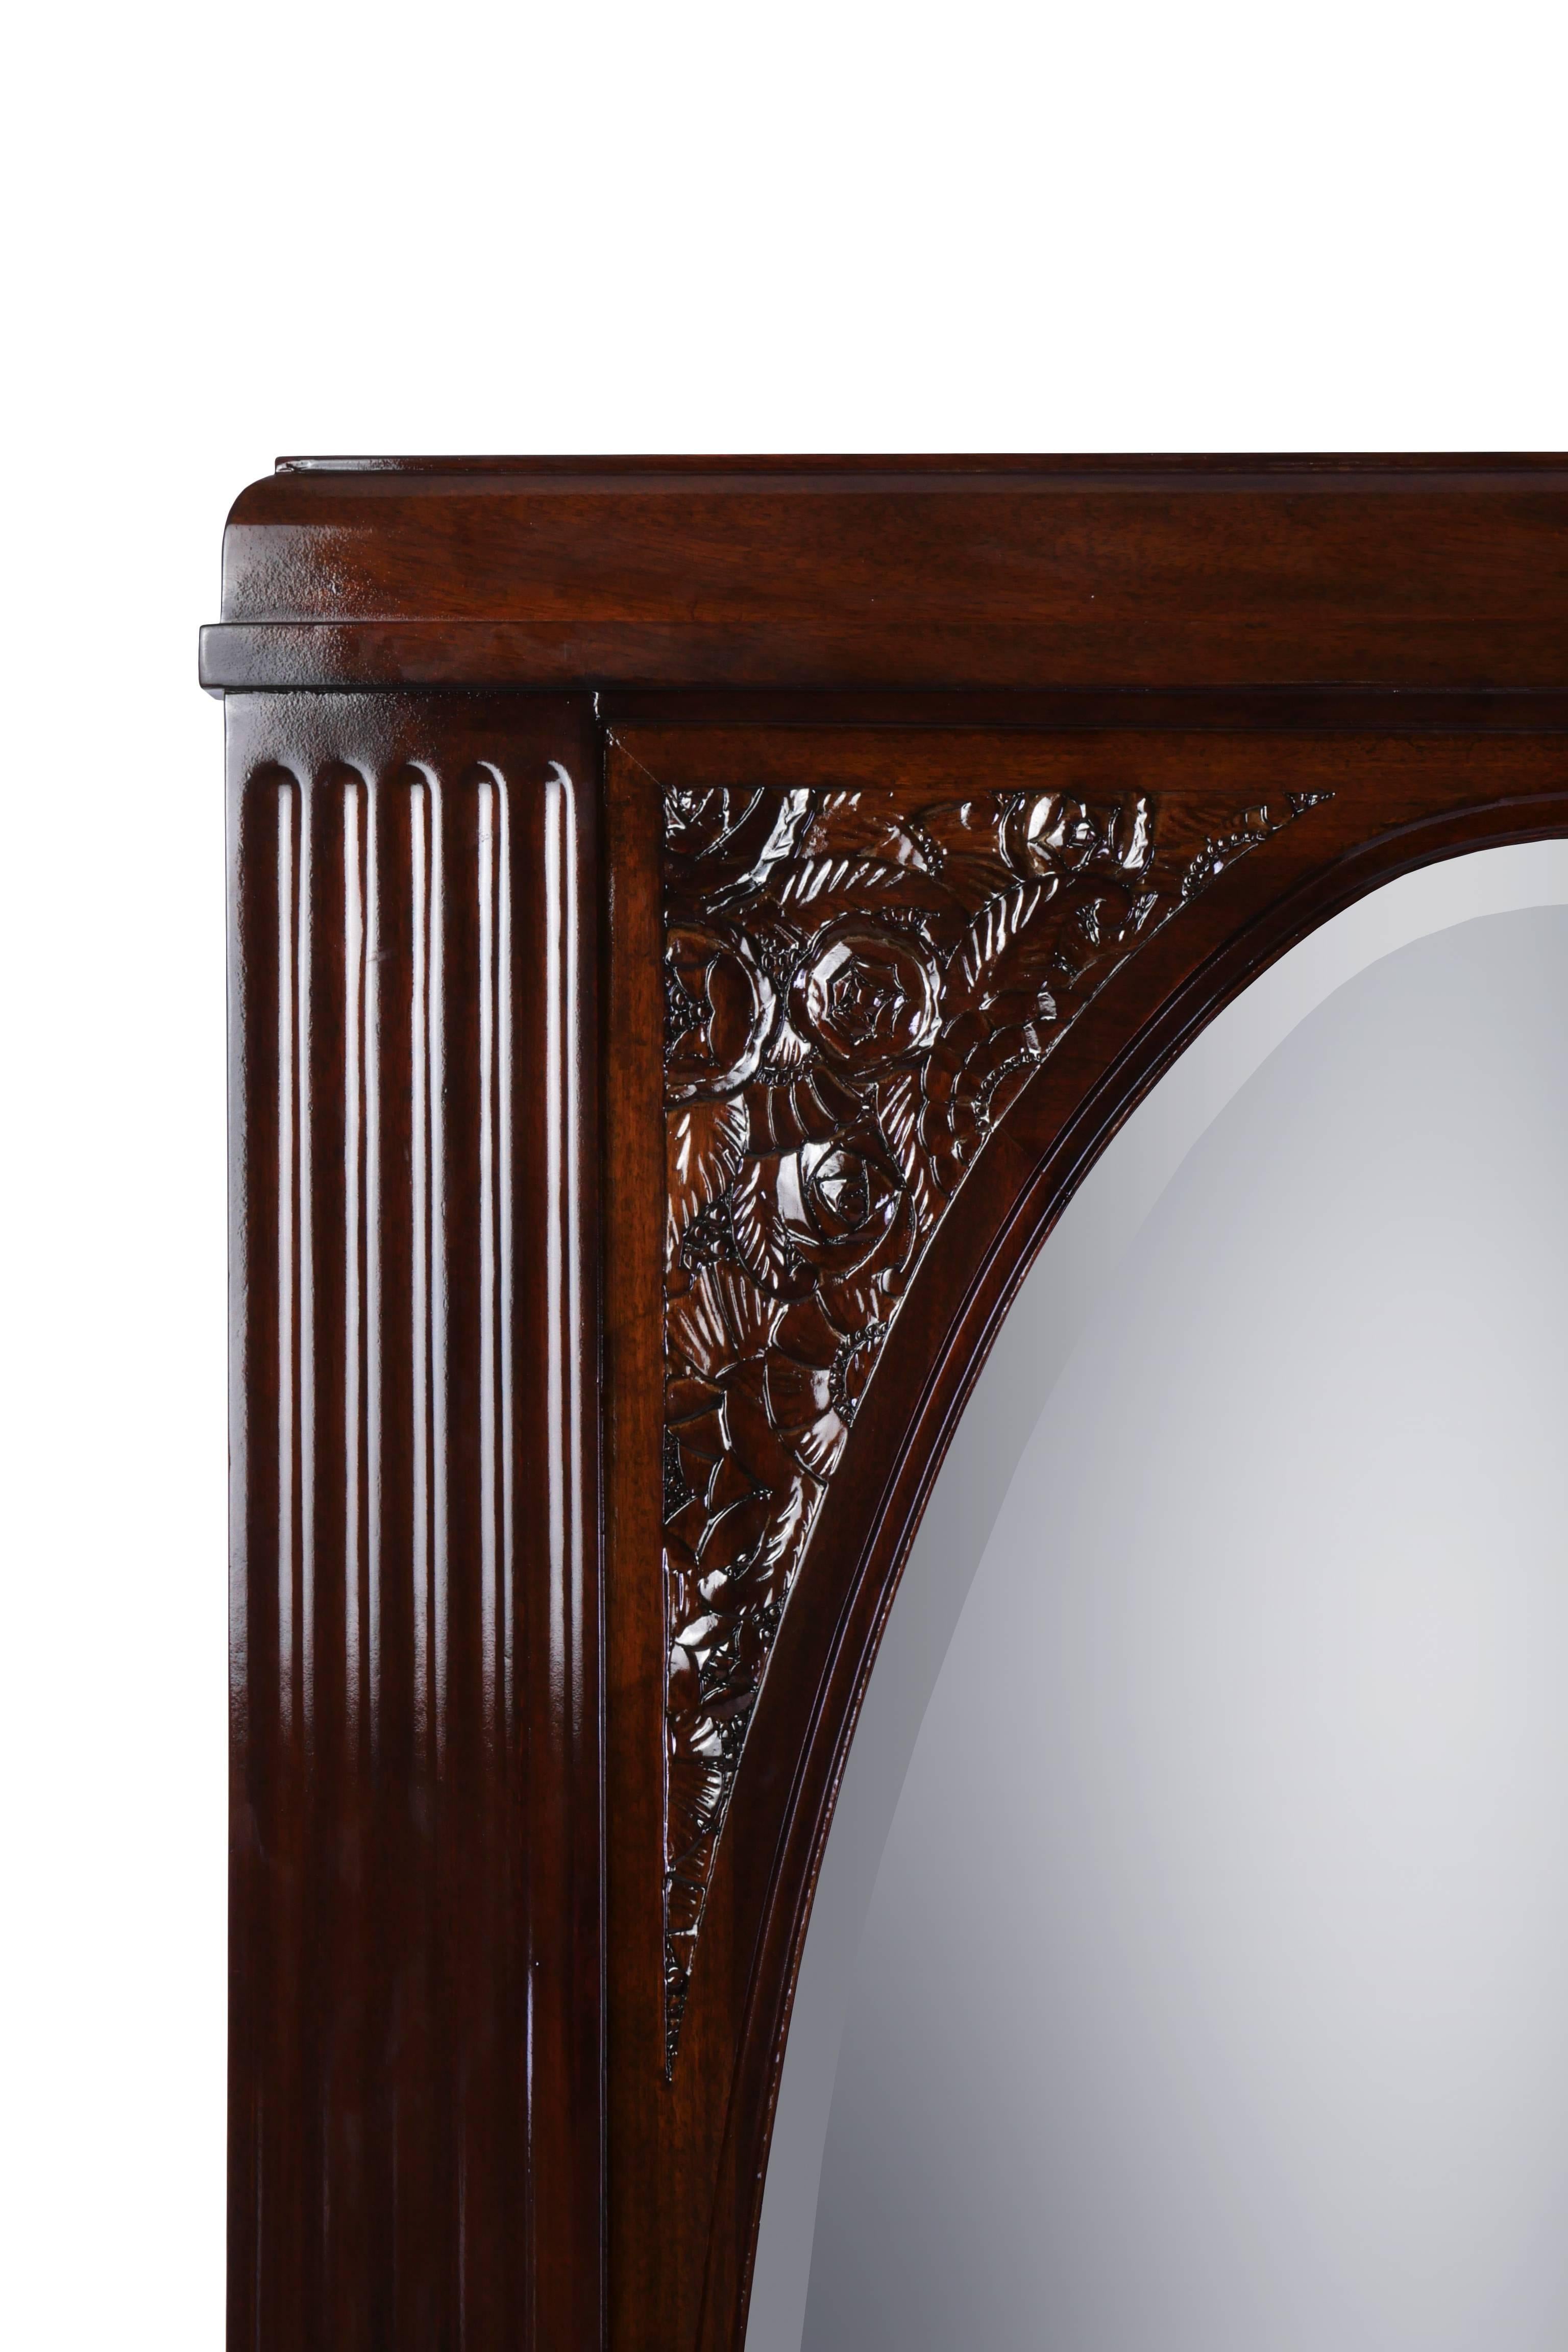 Impressive rectangular solid mahogany Art Deco freestanding mirror with carved floral decoration and oval mirror insert.